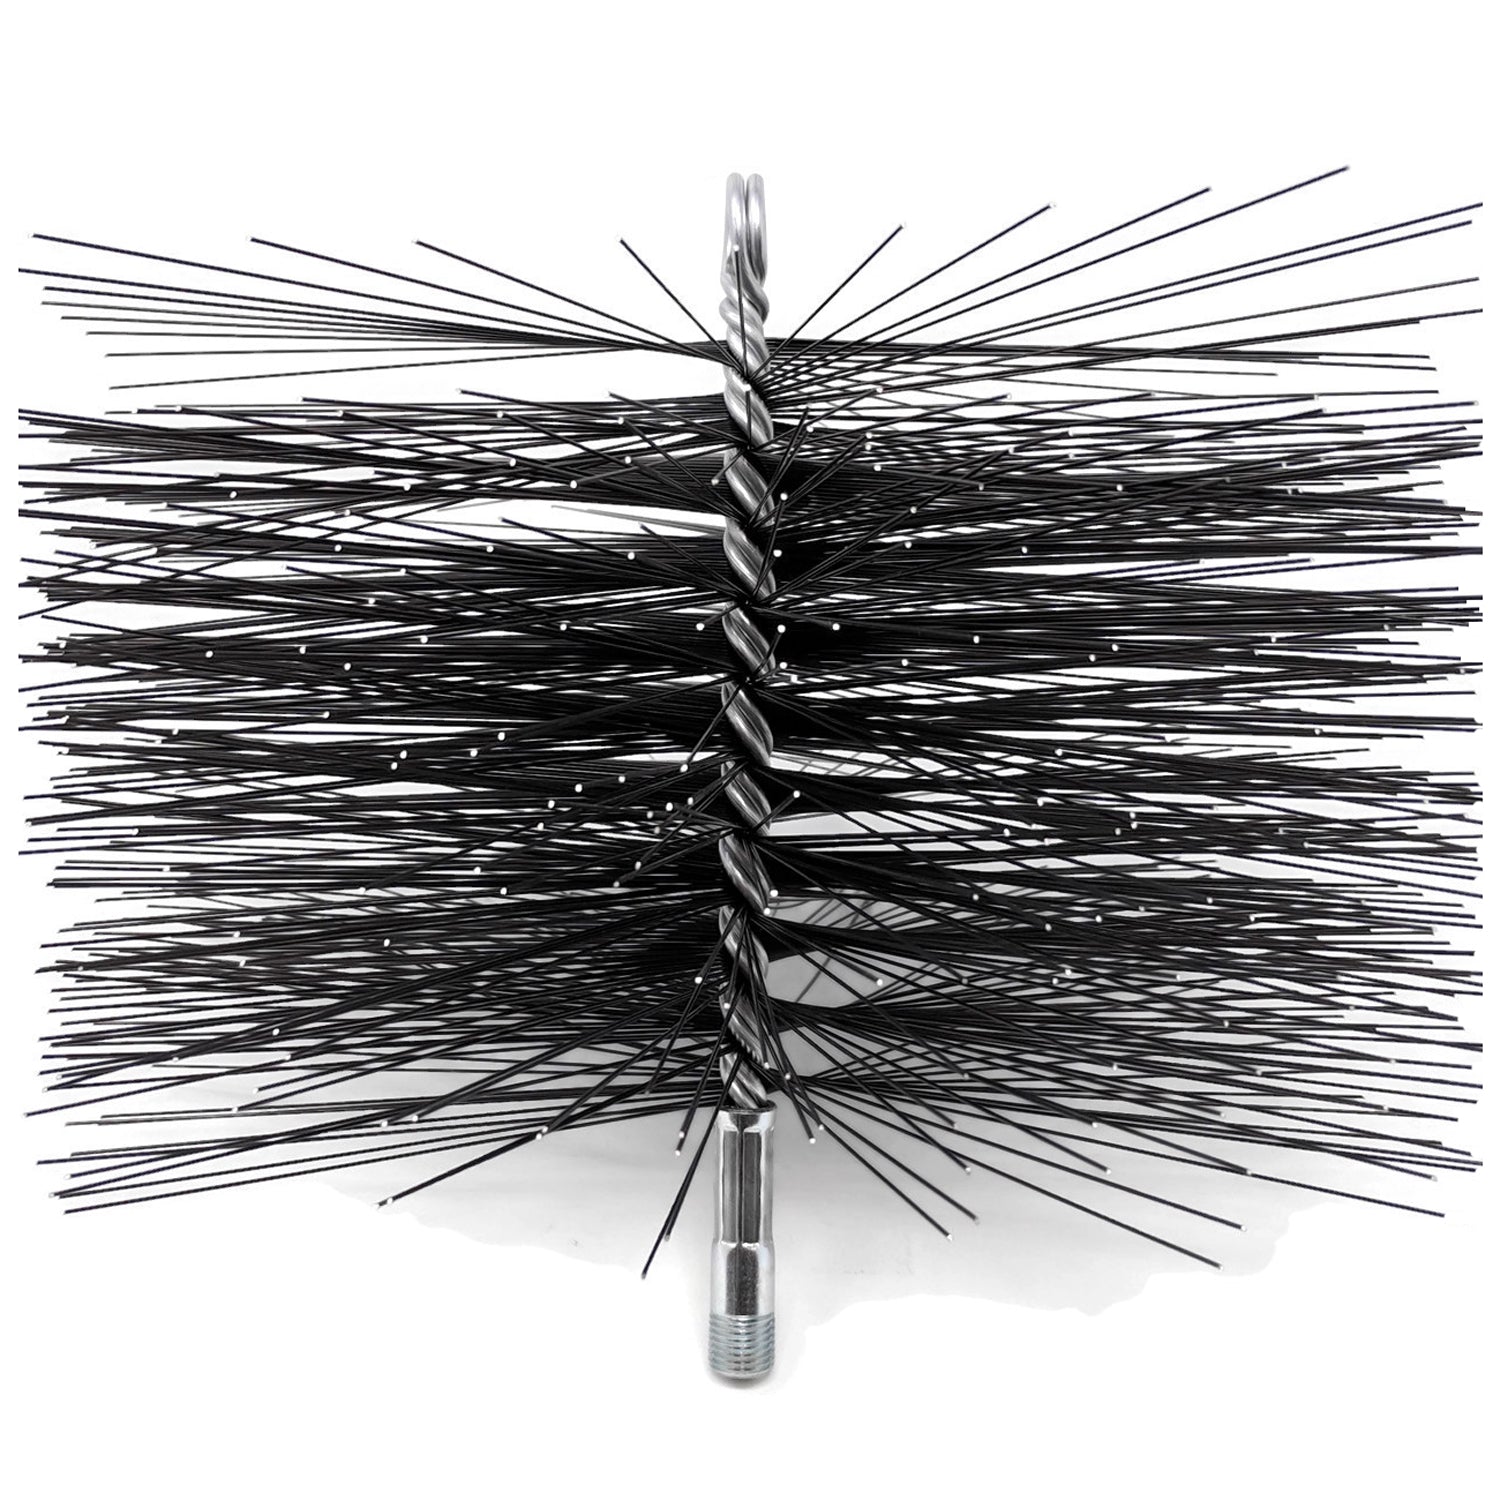 Pellet Stove Chimney Cleaning Brush – Midwest Hearth